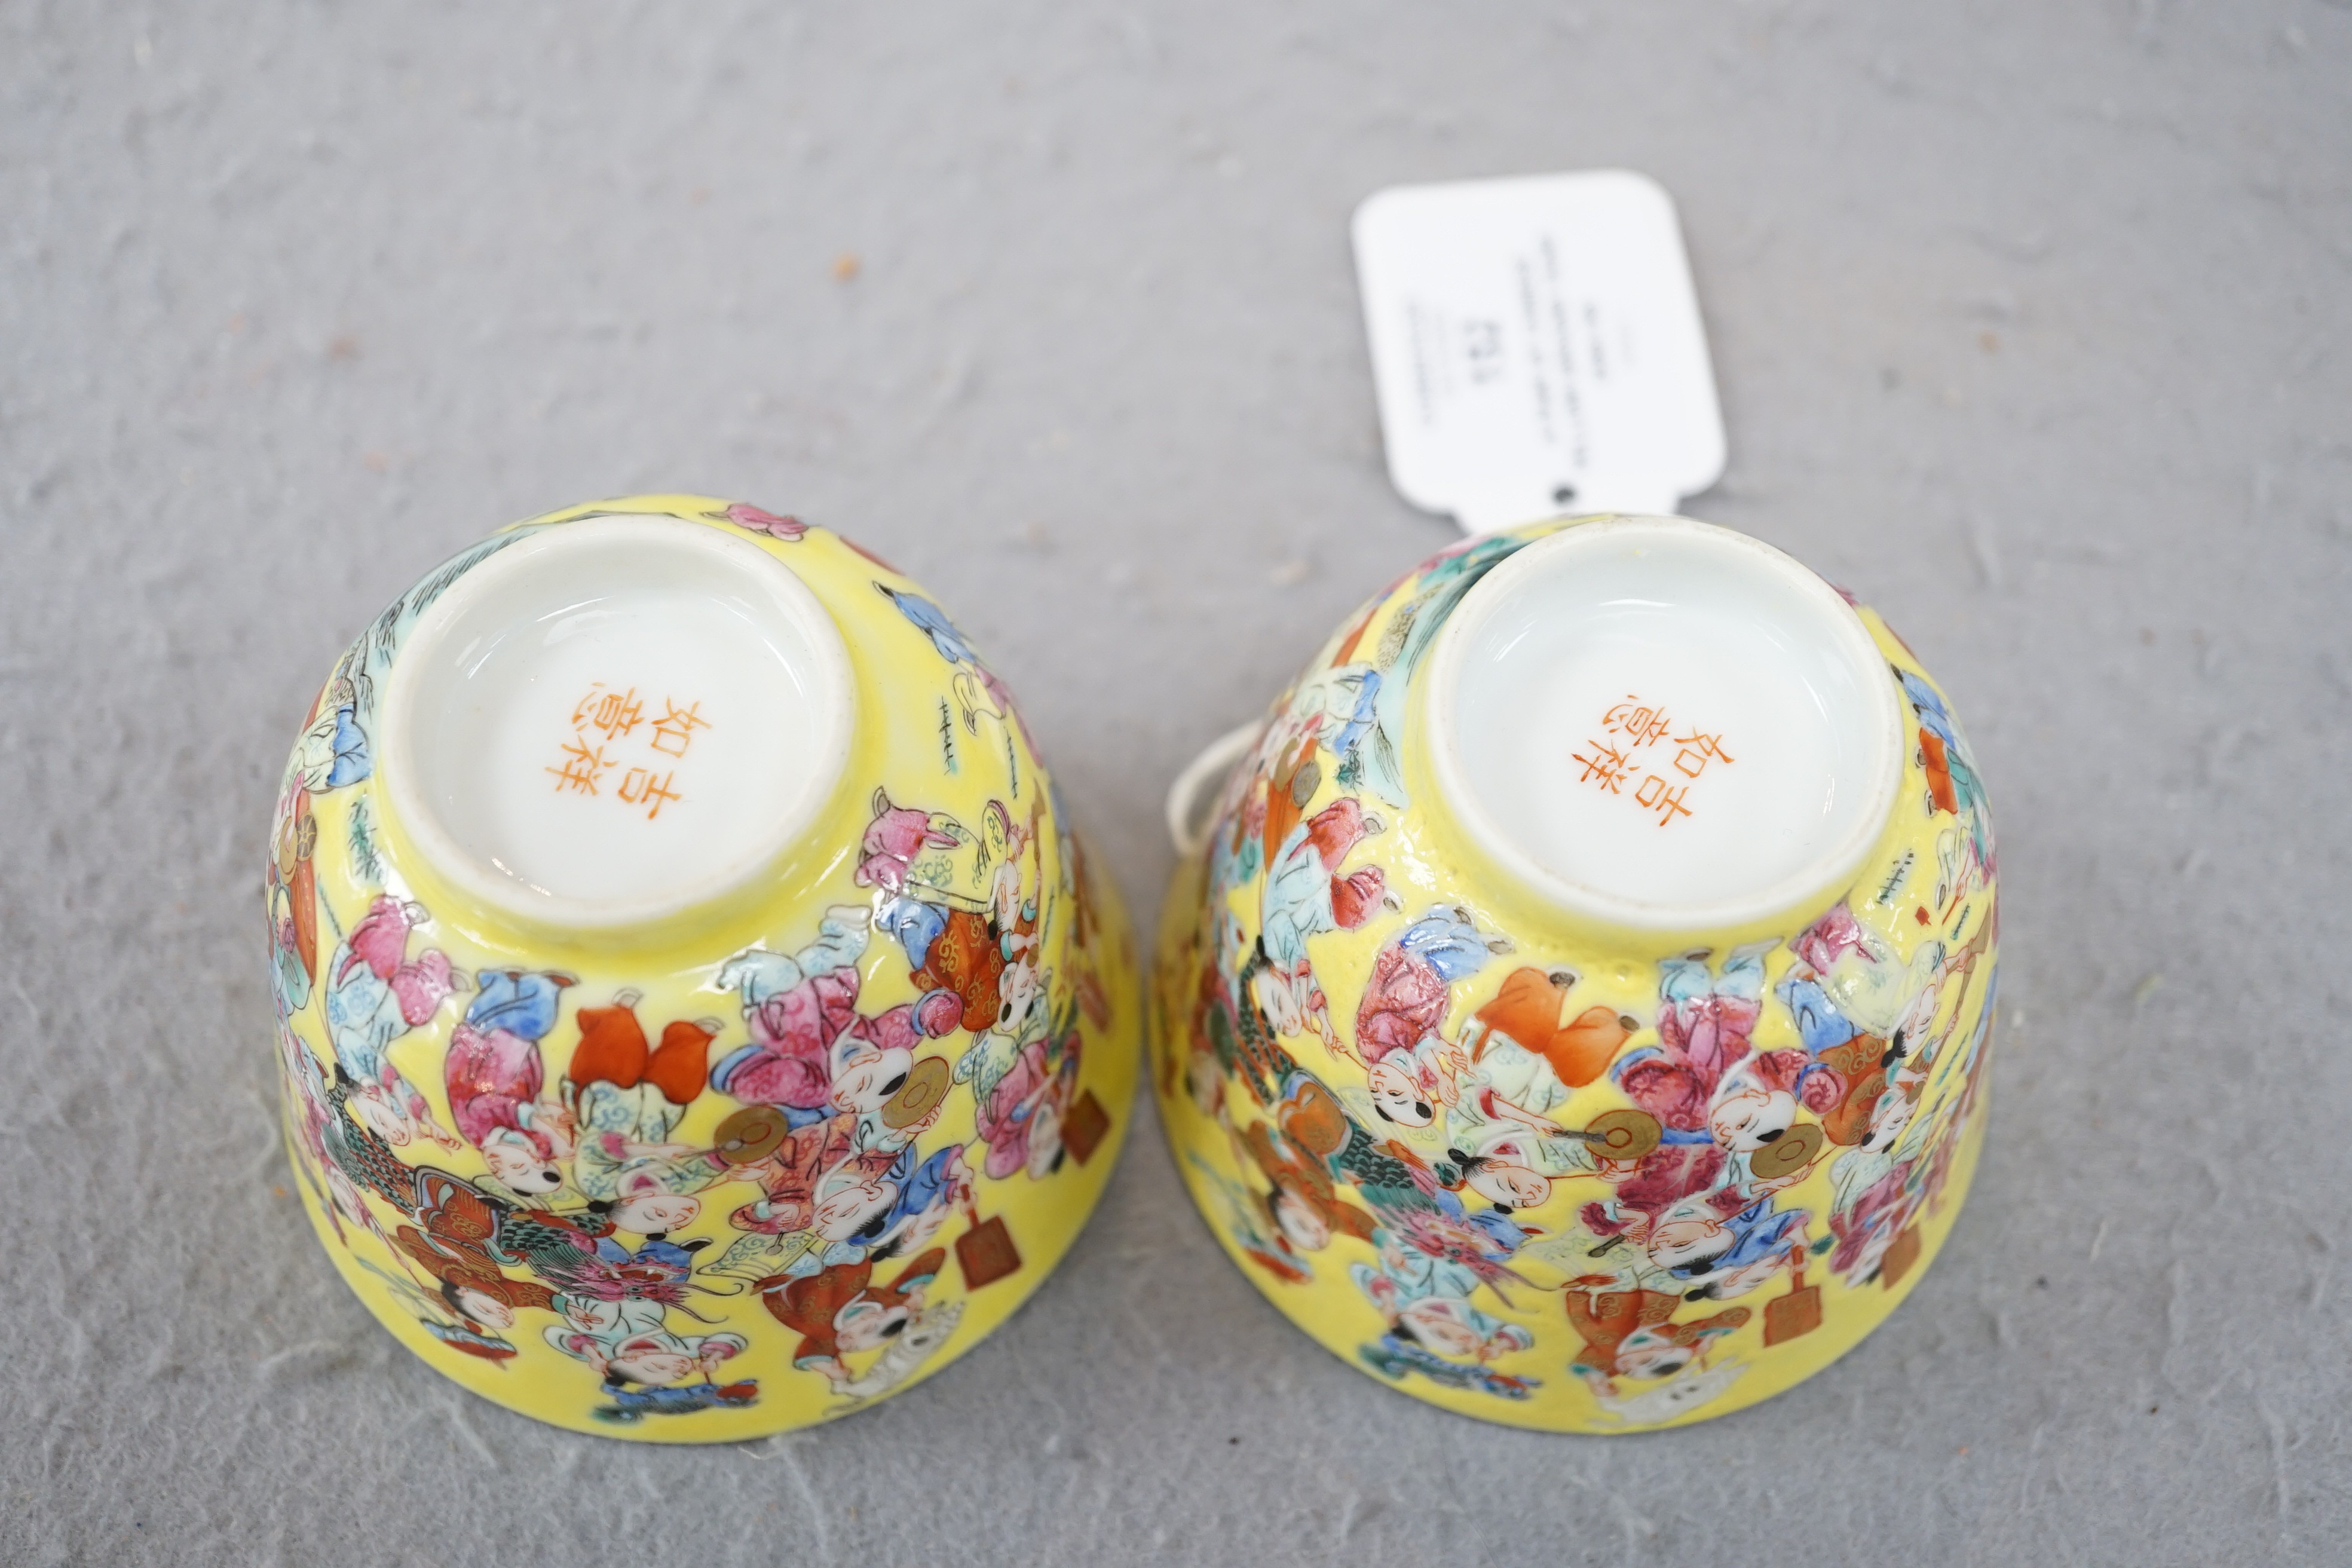 A pair of Chinese yellow ground 'Hundred Boys’ cups, 19th century, 6.5cm high 8.5cm diameter